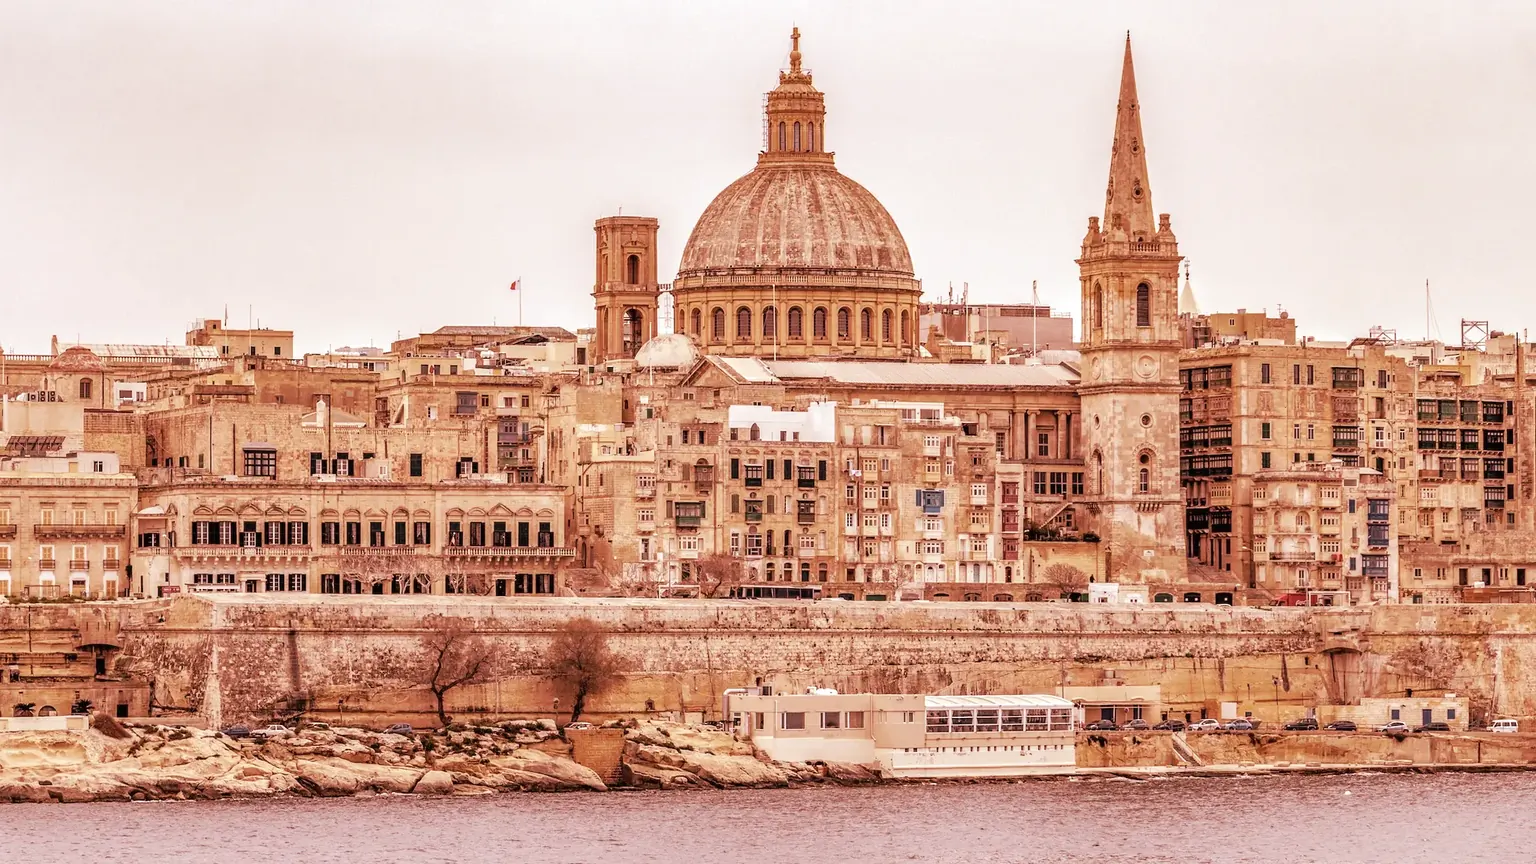 Malta is trying hard to throw off a reputation for tax evasion and money laundering. Image: Shutterstock